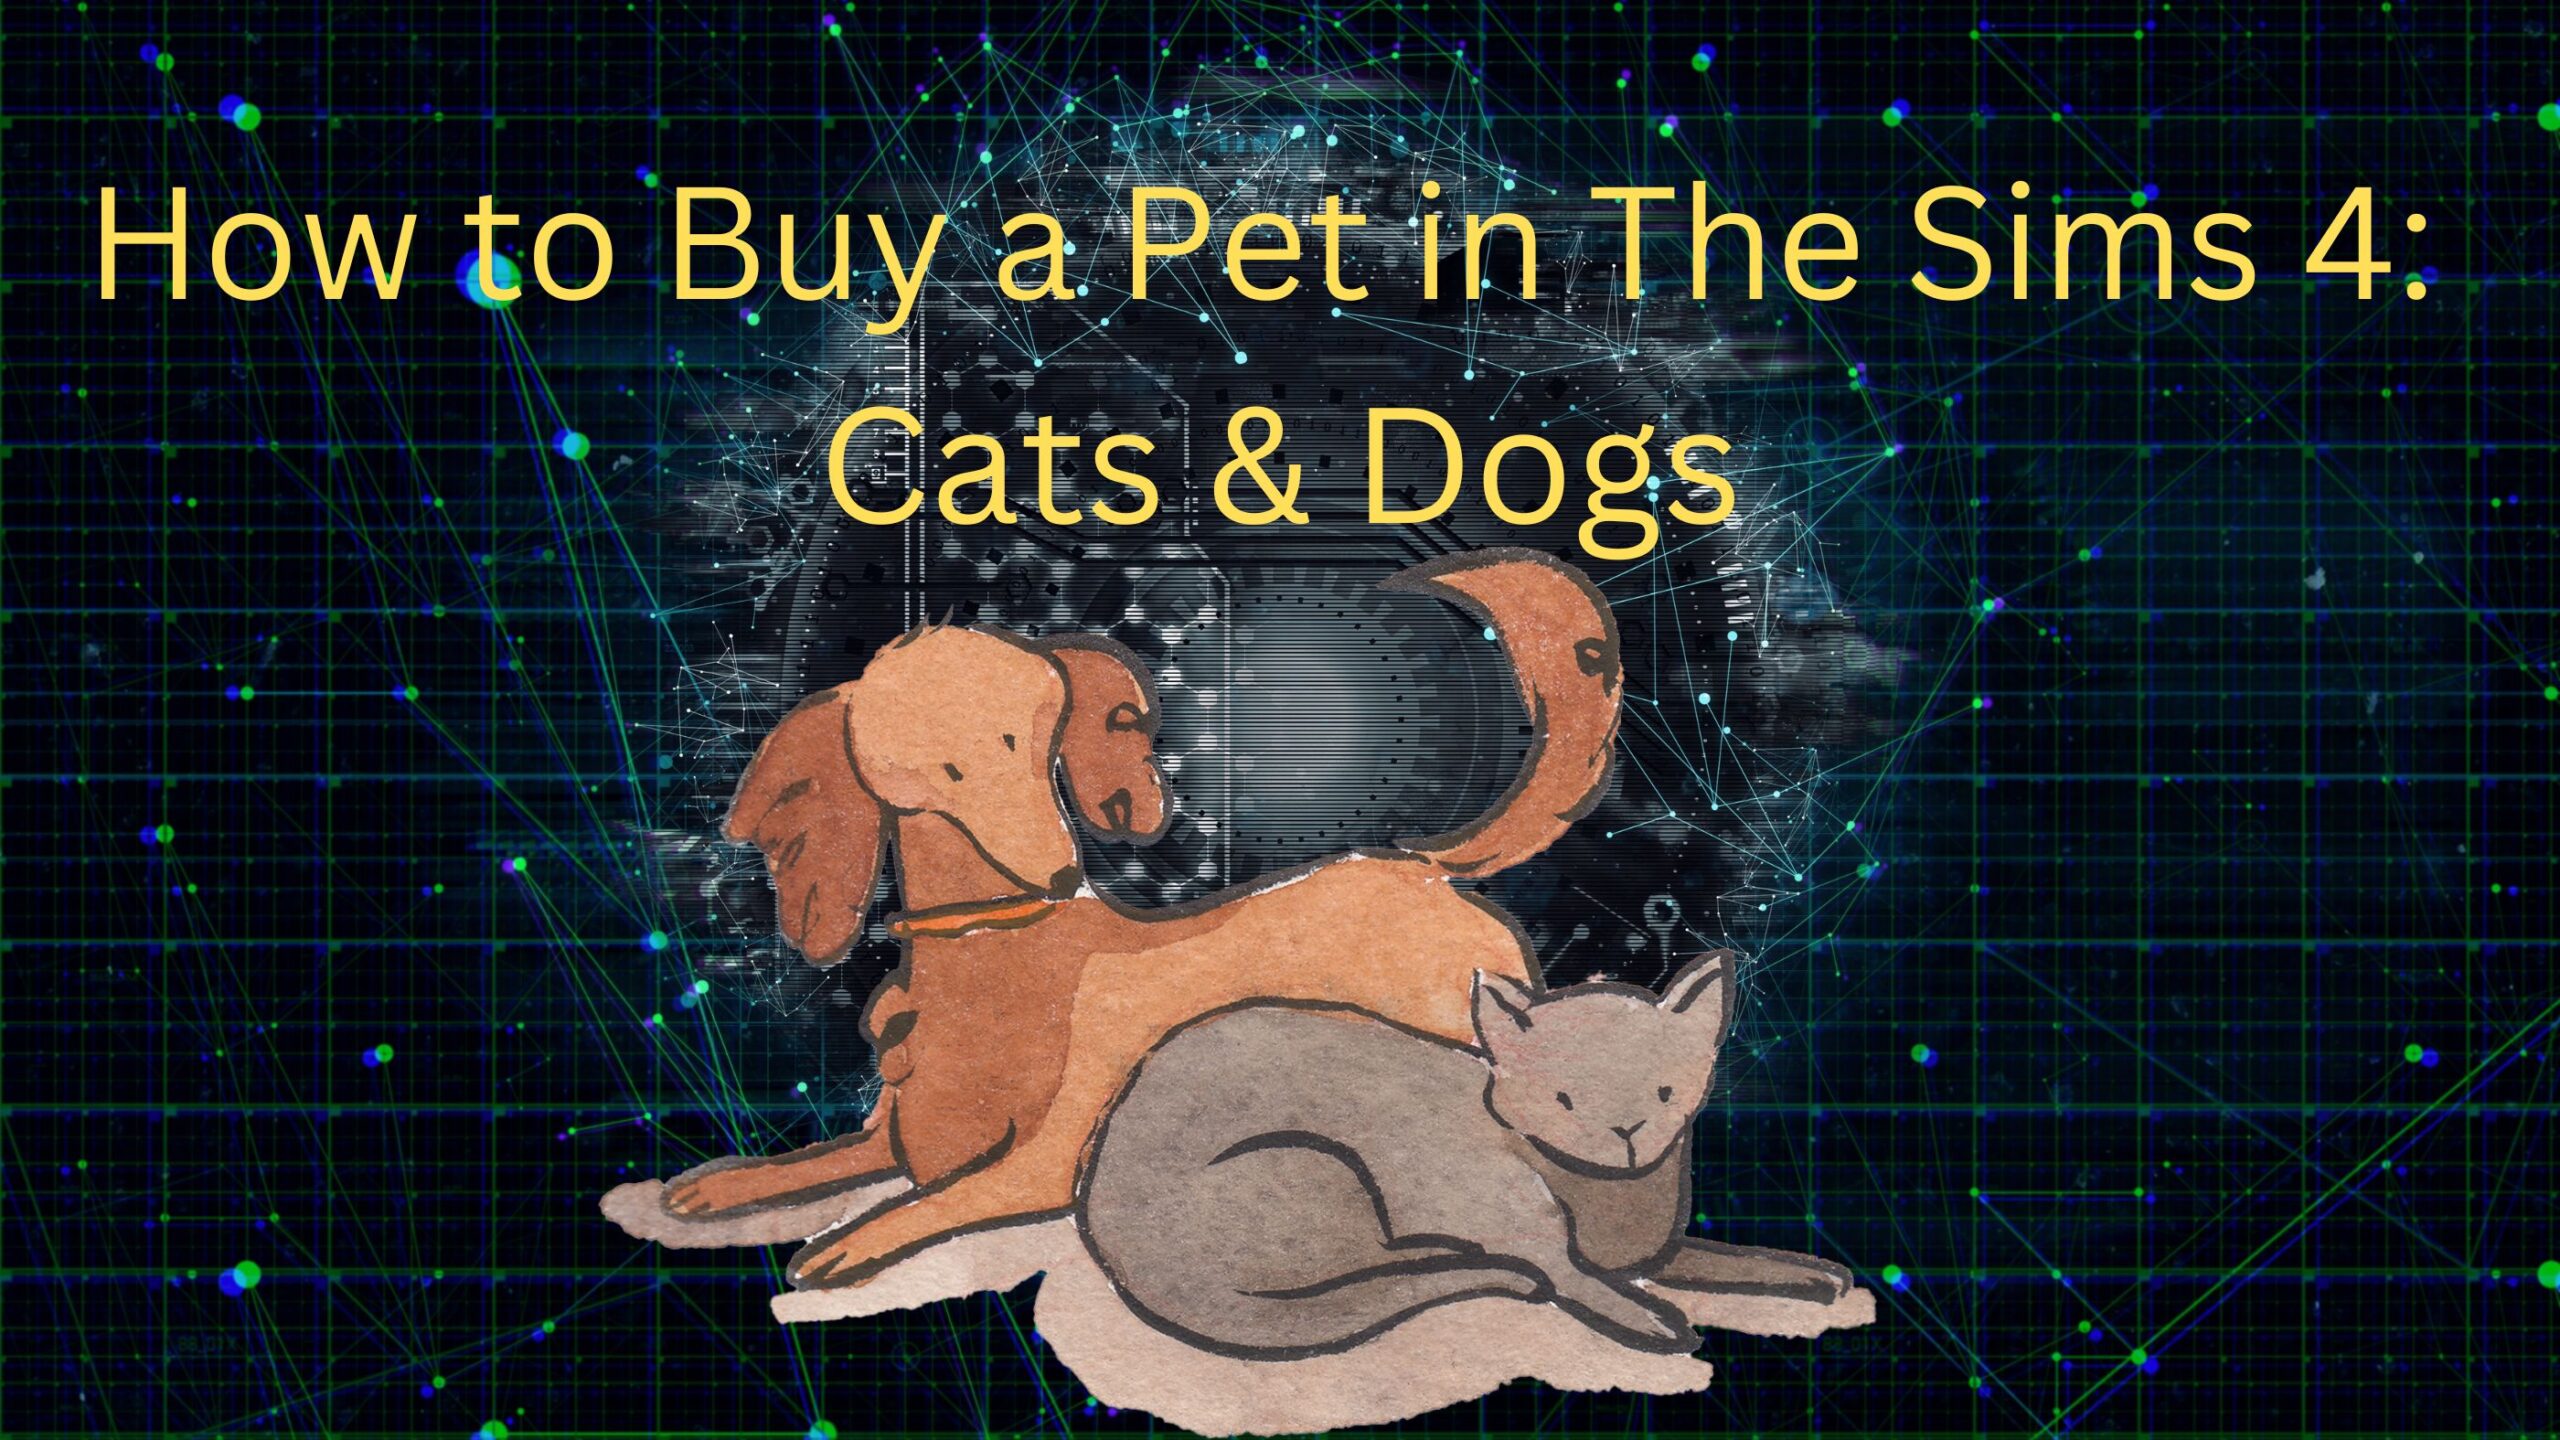 How to Buy a Pet in The Sims 4: Cats & Dogs